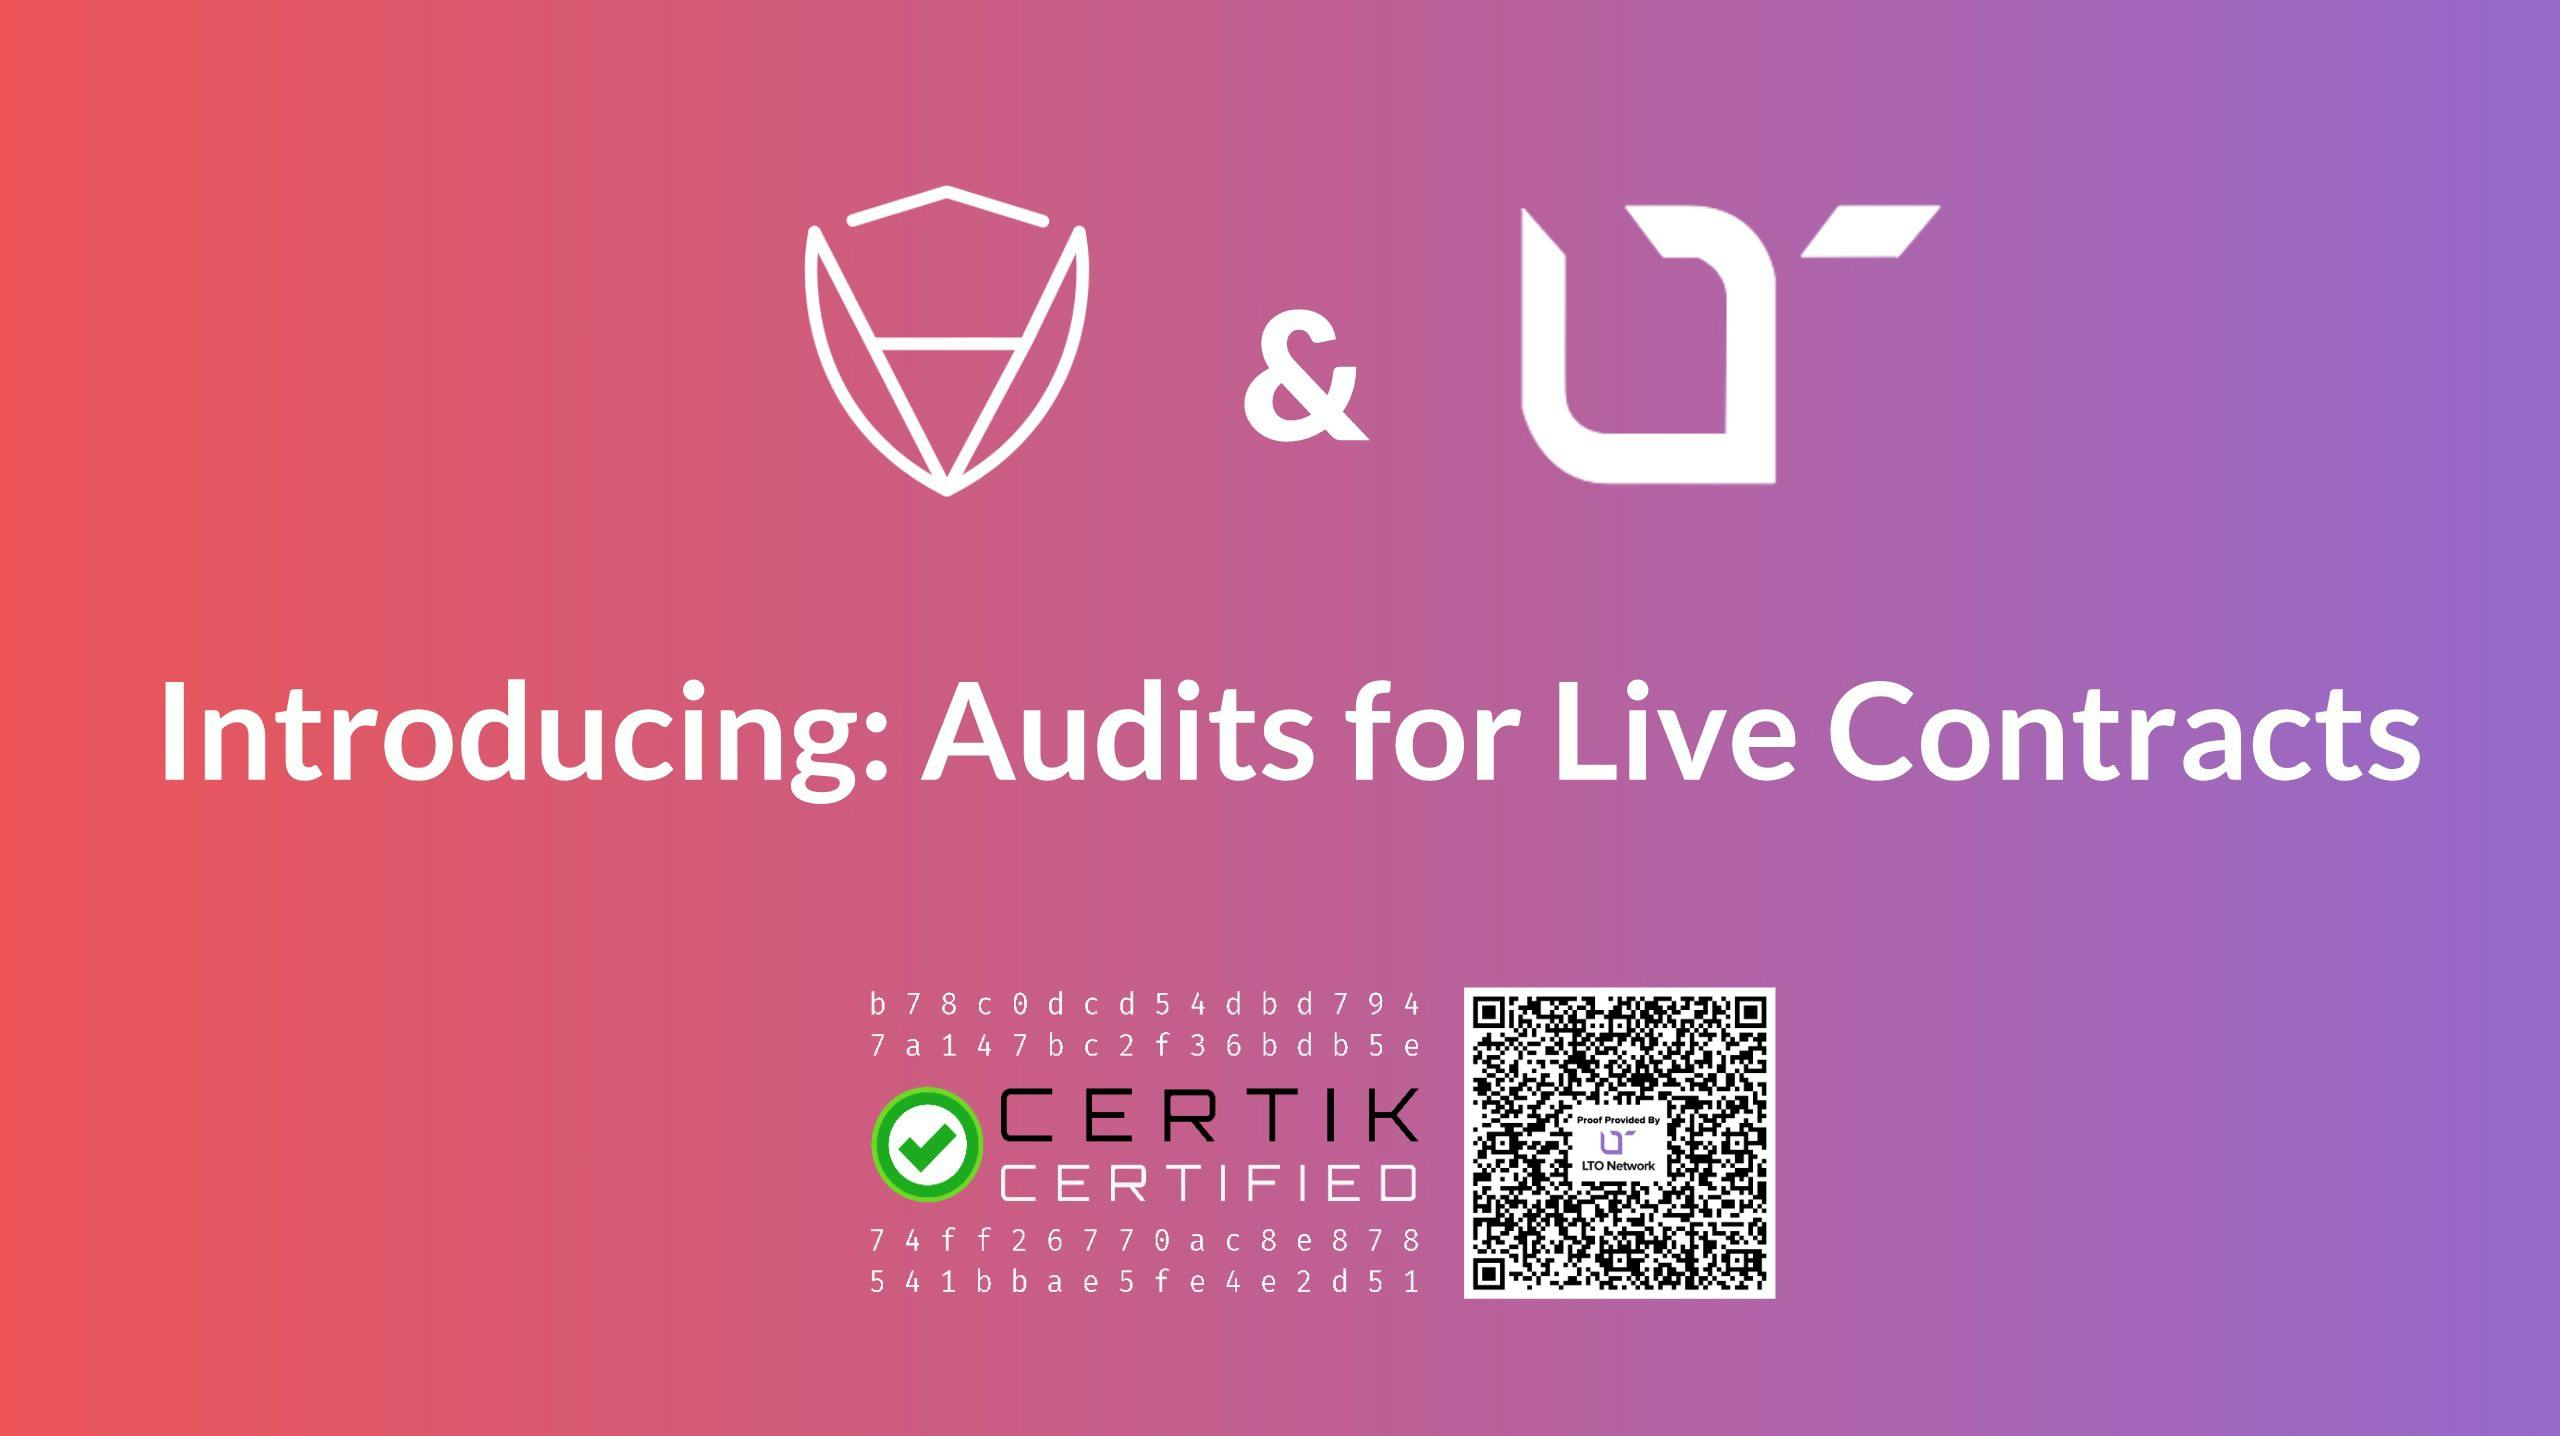 Introducing: Live Contract Audits on LTO Network with CertiK